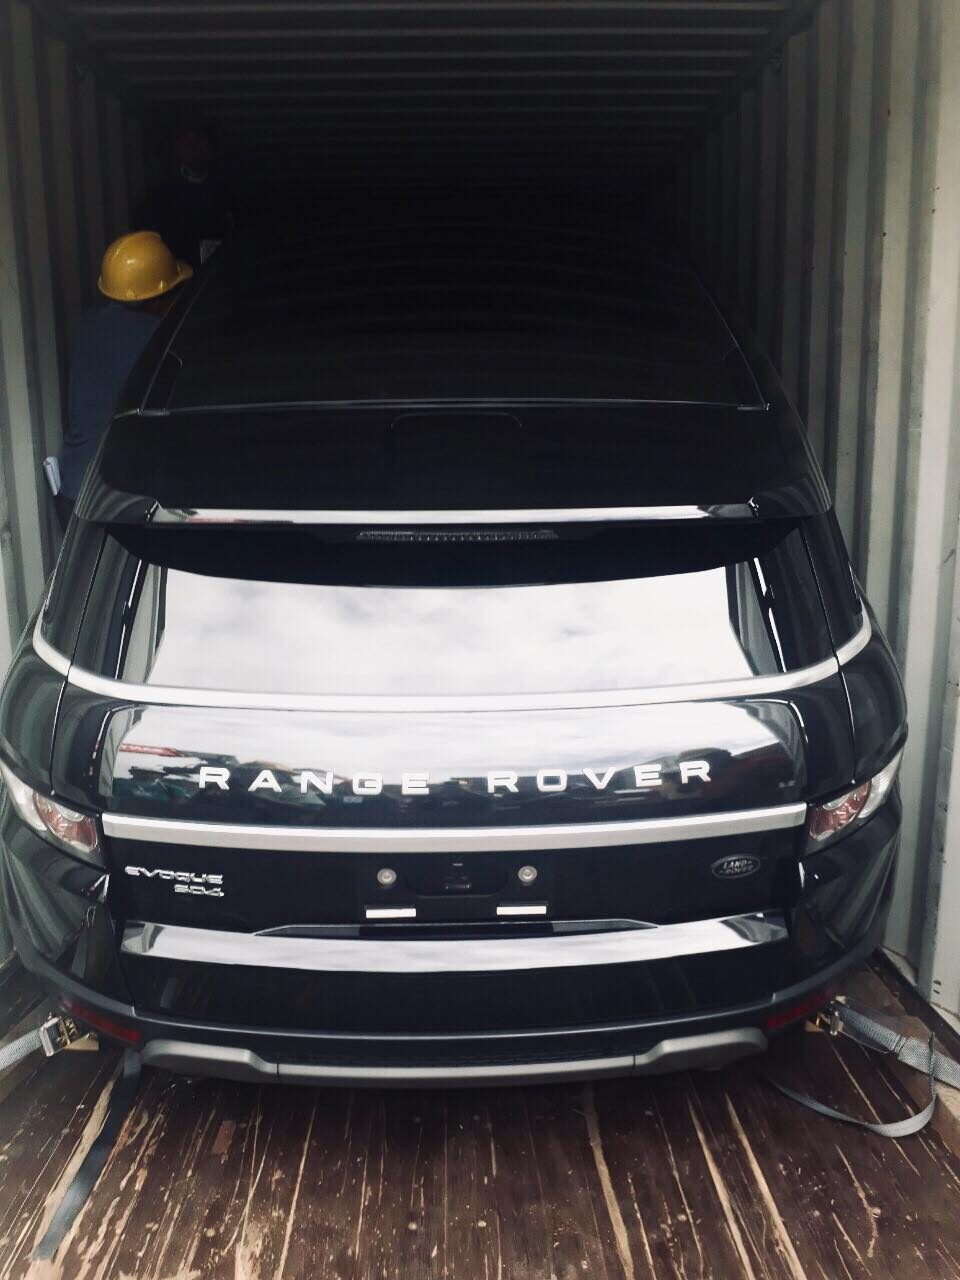 LUXURY VEHICLE. A Range Rover Evoque, one of 4 luxury vehicles found in the shipment.  Photo from Bureau of Customs.   